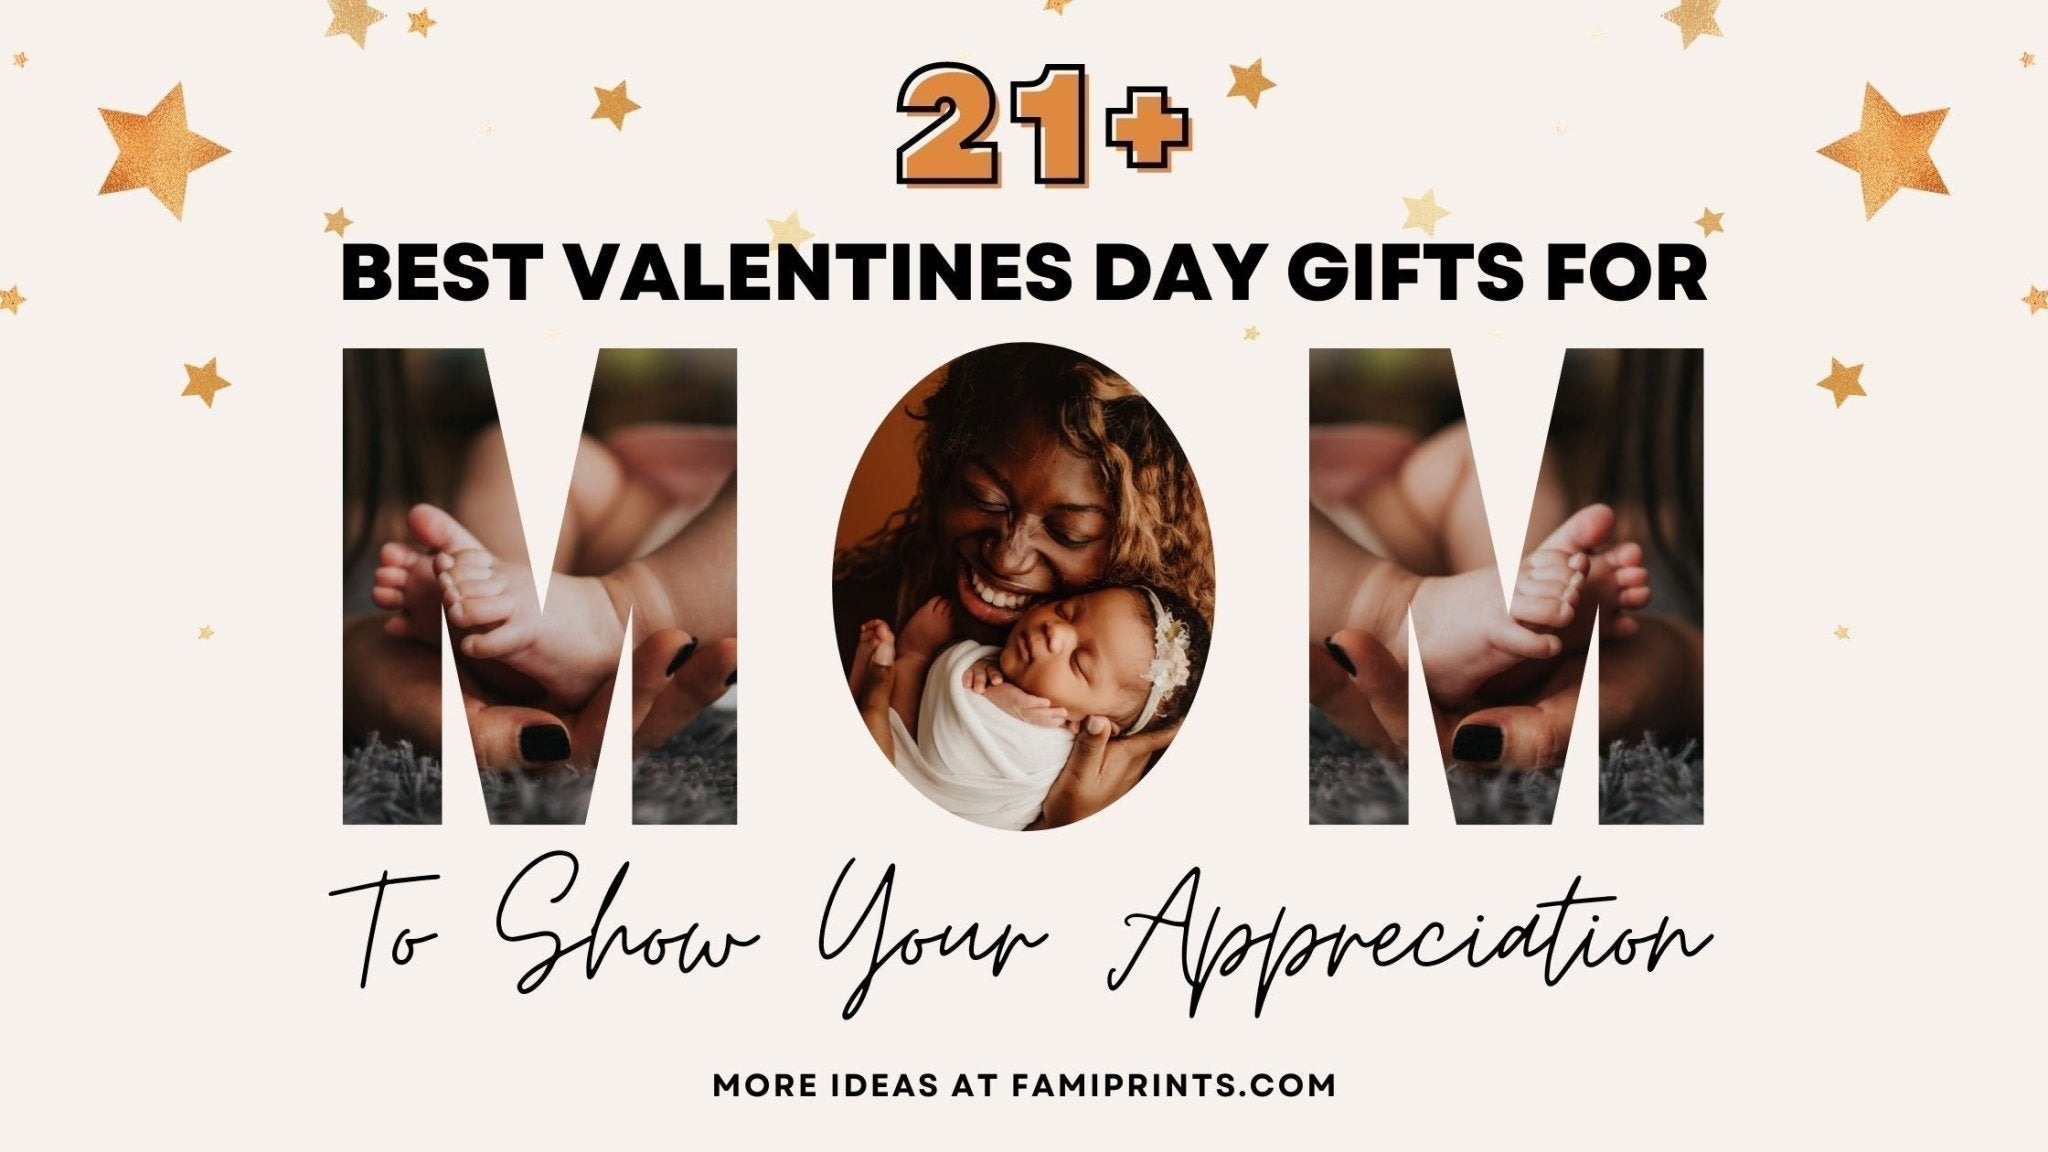 21+ Best Valentines Day Gifts For Mom To Show Your Appreciation | FamiPrints | Trending Customizable Family Gifts